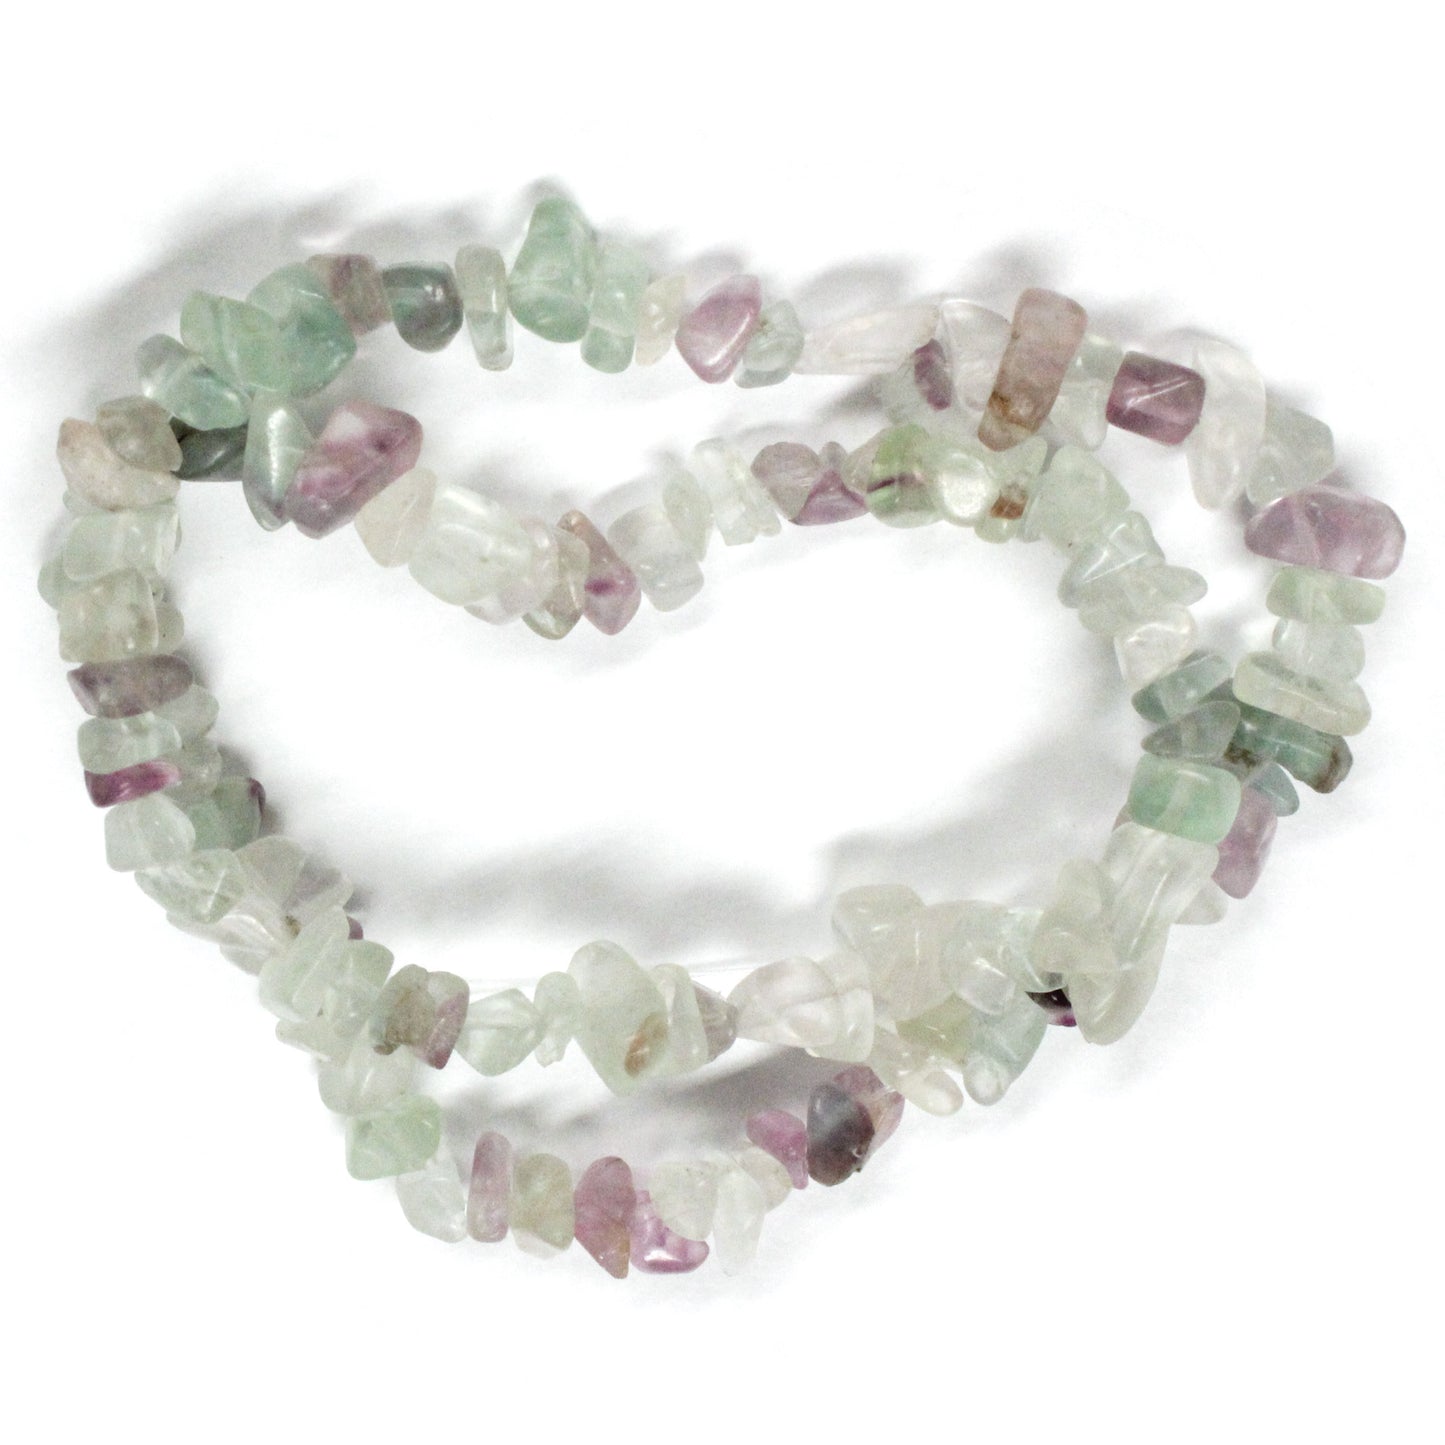 Rainbow Fluorite Chip Beads / 16 Inch strand / 5-10mm chips / natural translucent stone